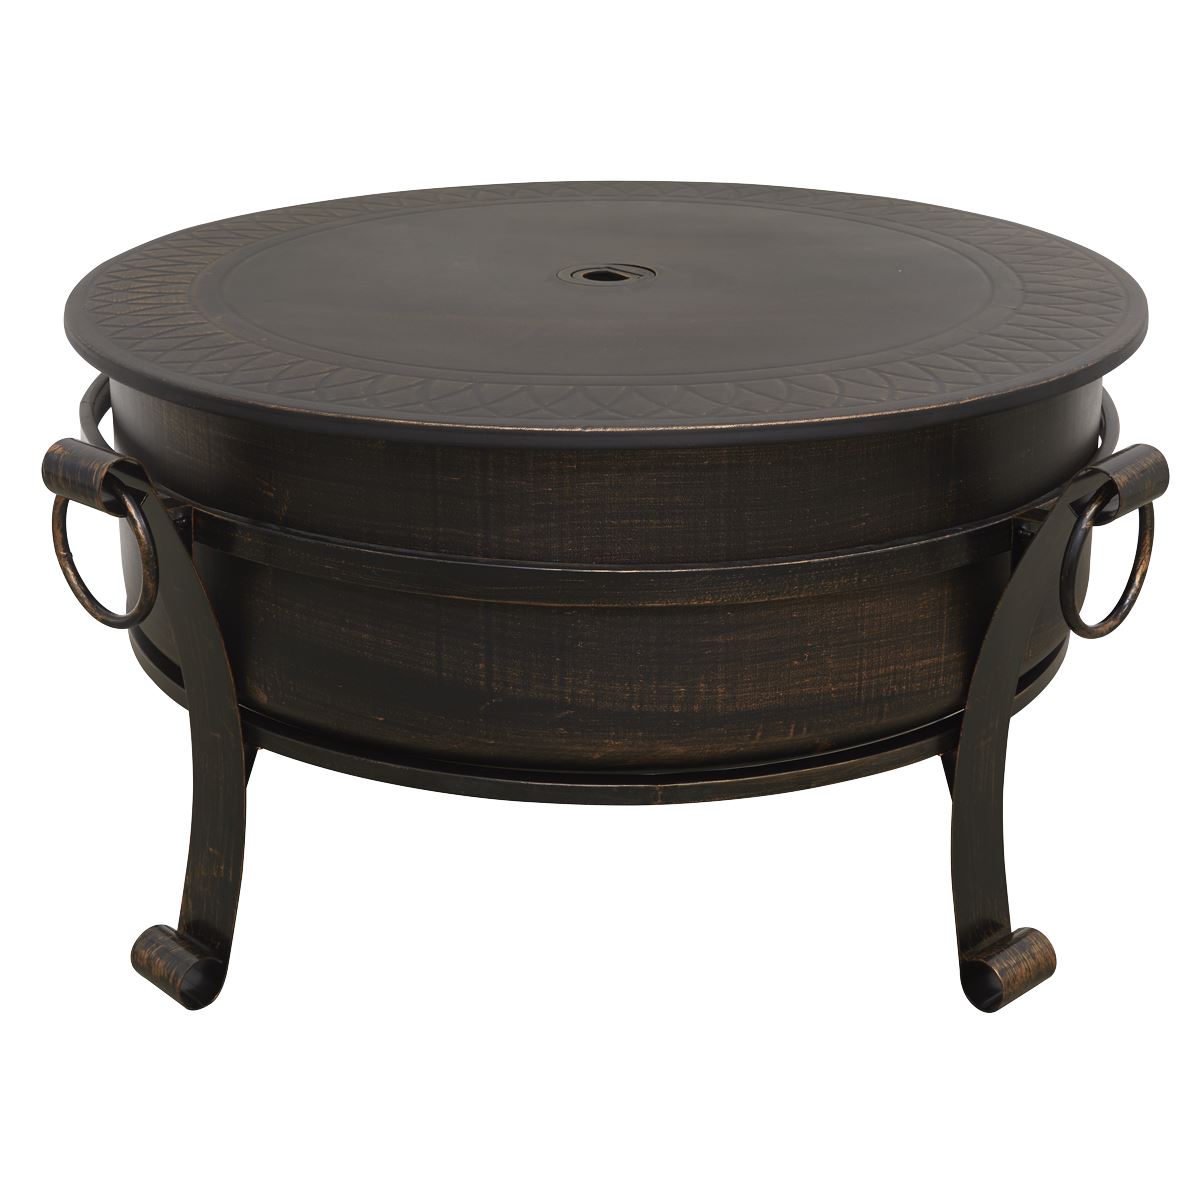 Dellonda 30" Deluxe 2-in-1 Outdoor Fire Pit & Coffee Table Antique Bronze Effect